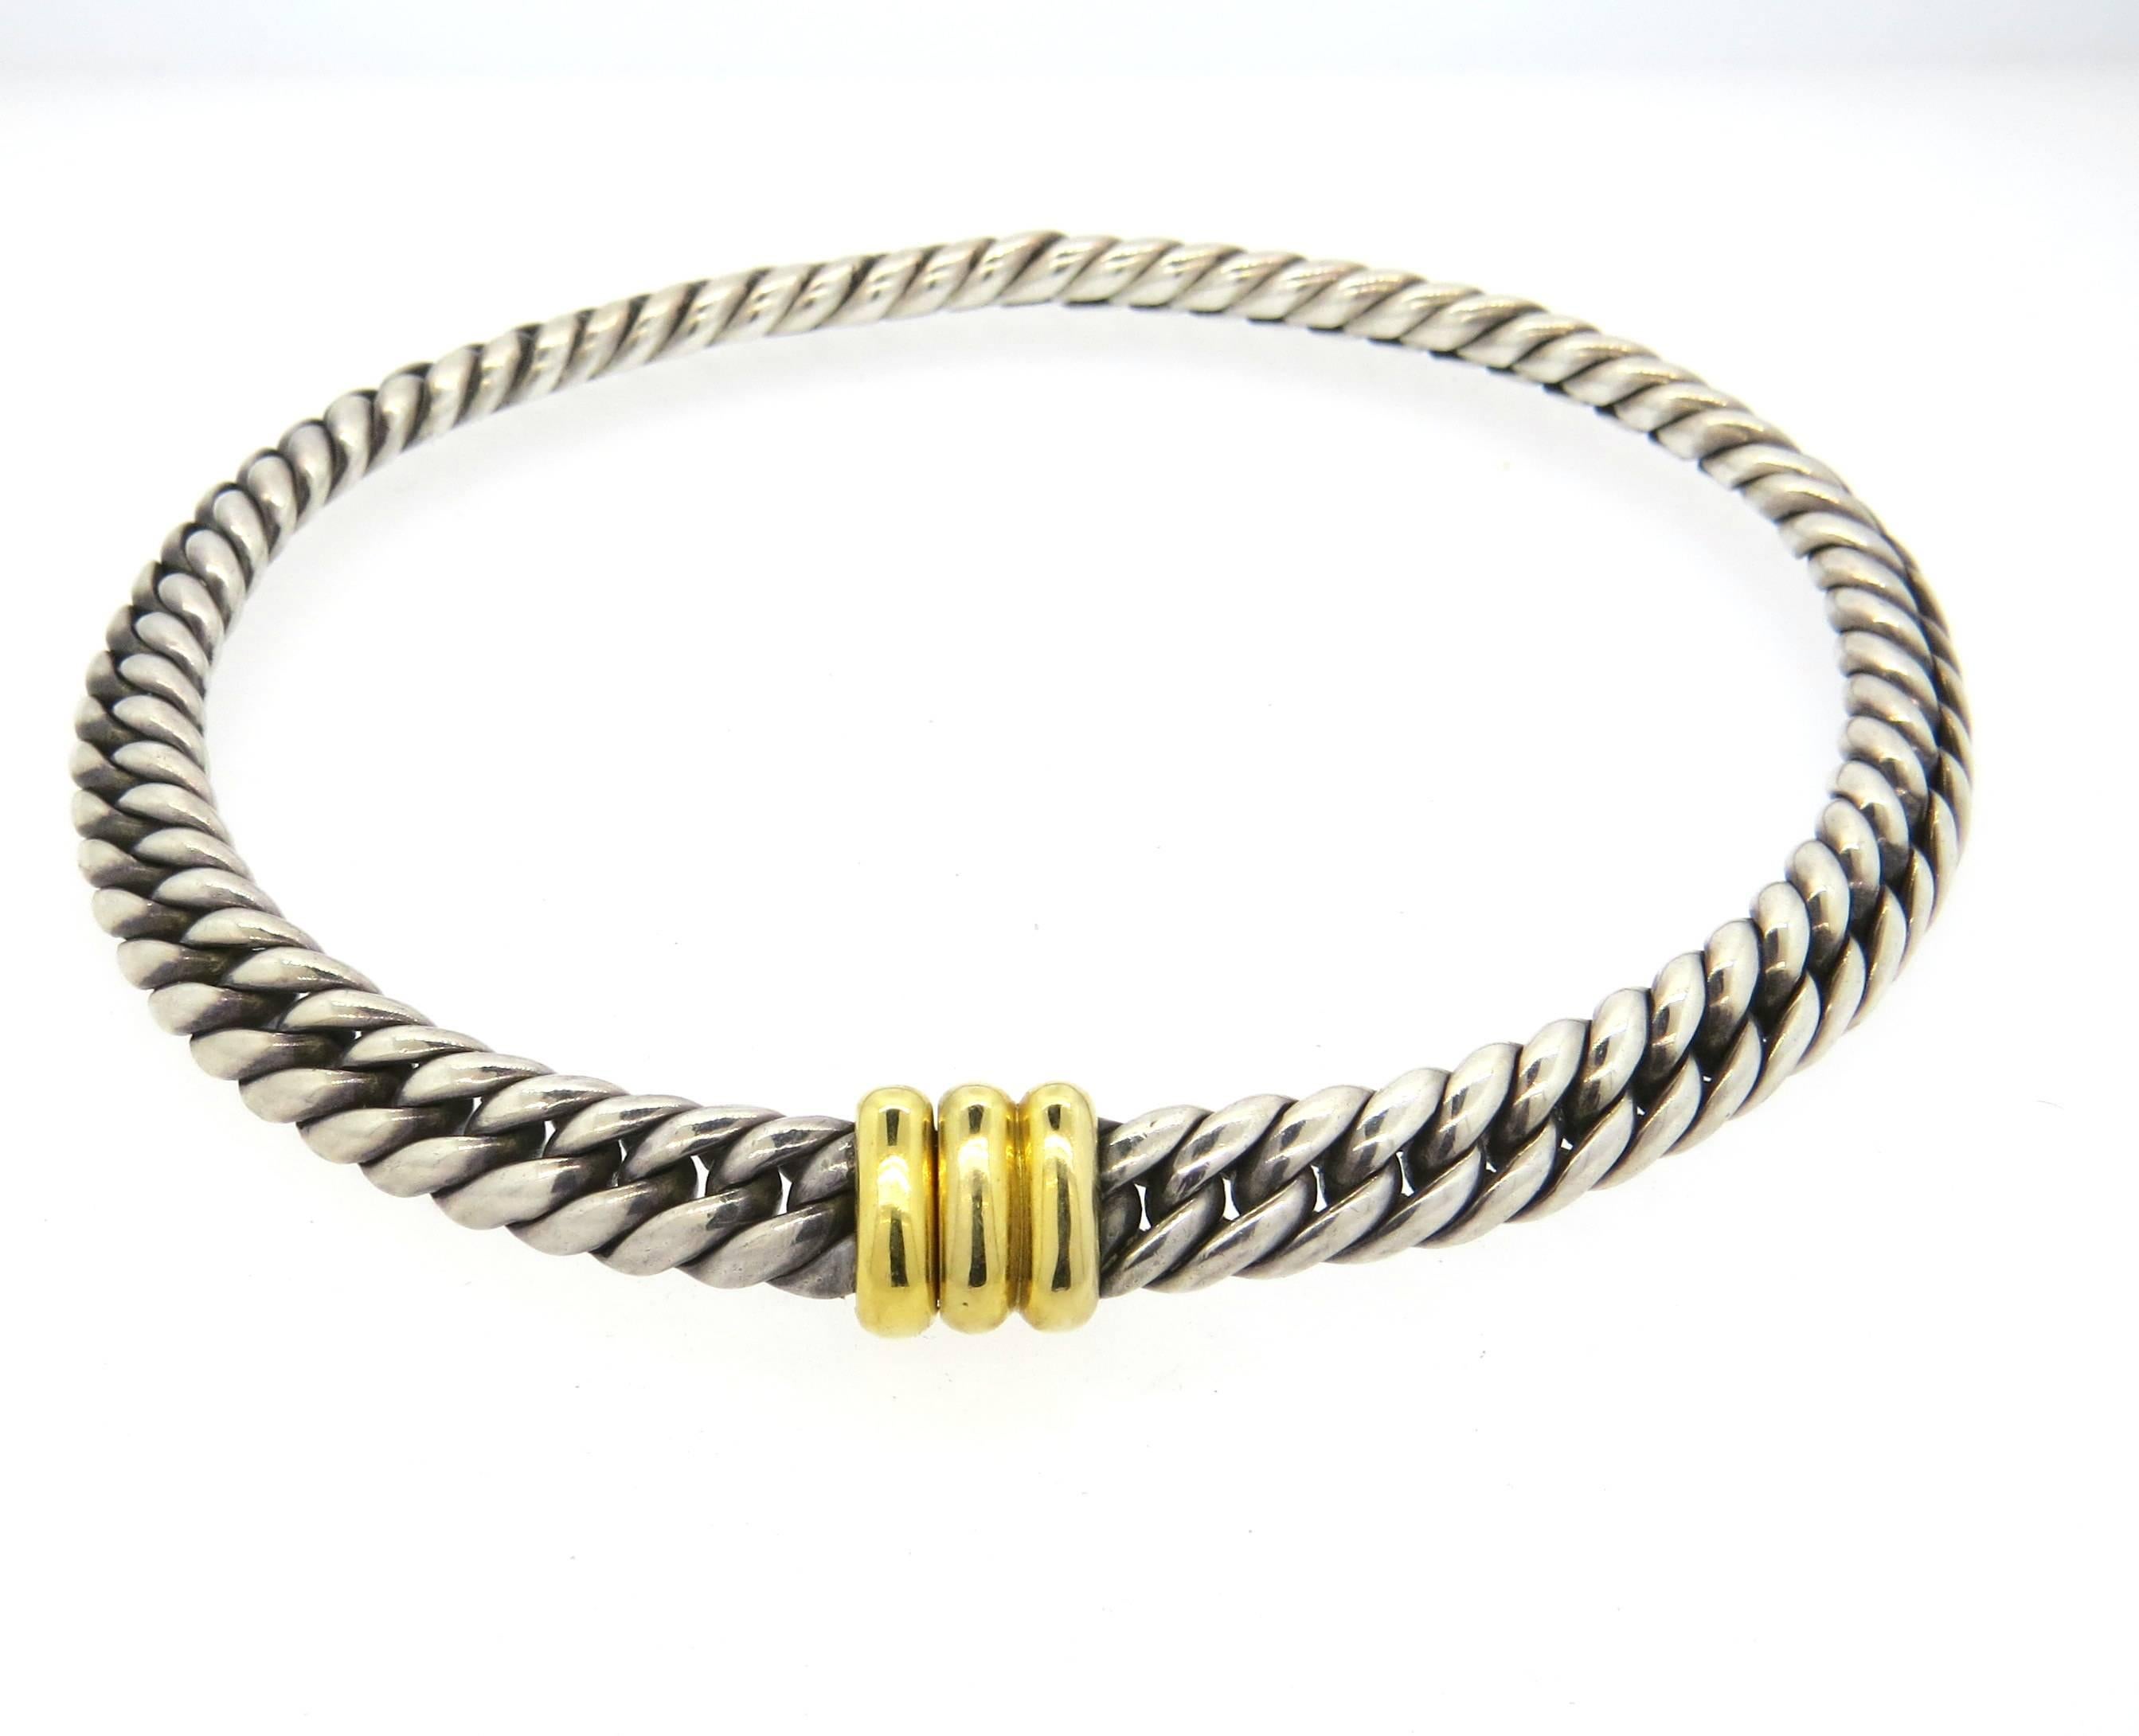 Heavy sterling silver and 18k yellow gold clasp necklace, crafted by Hermes. Necklace is 15 1/2